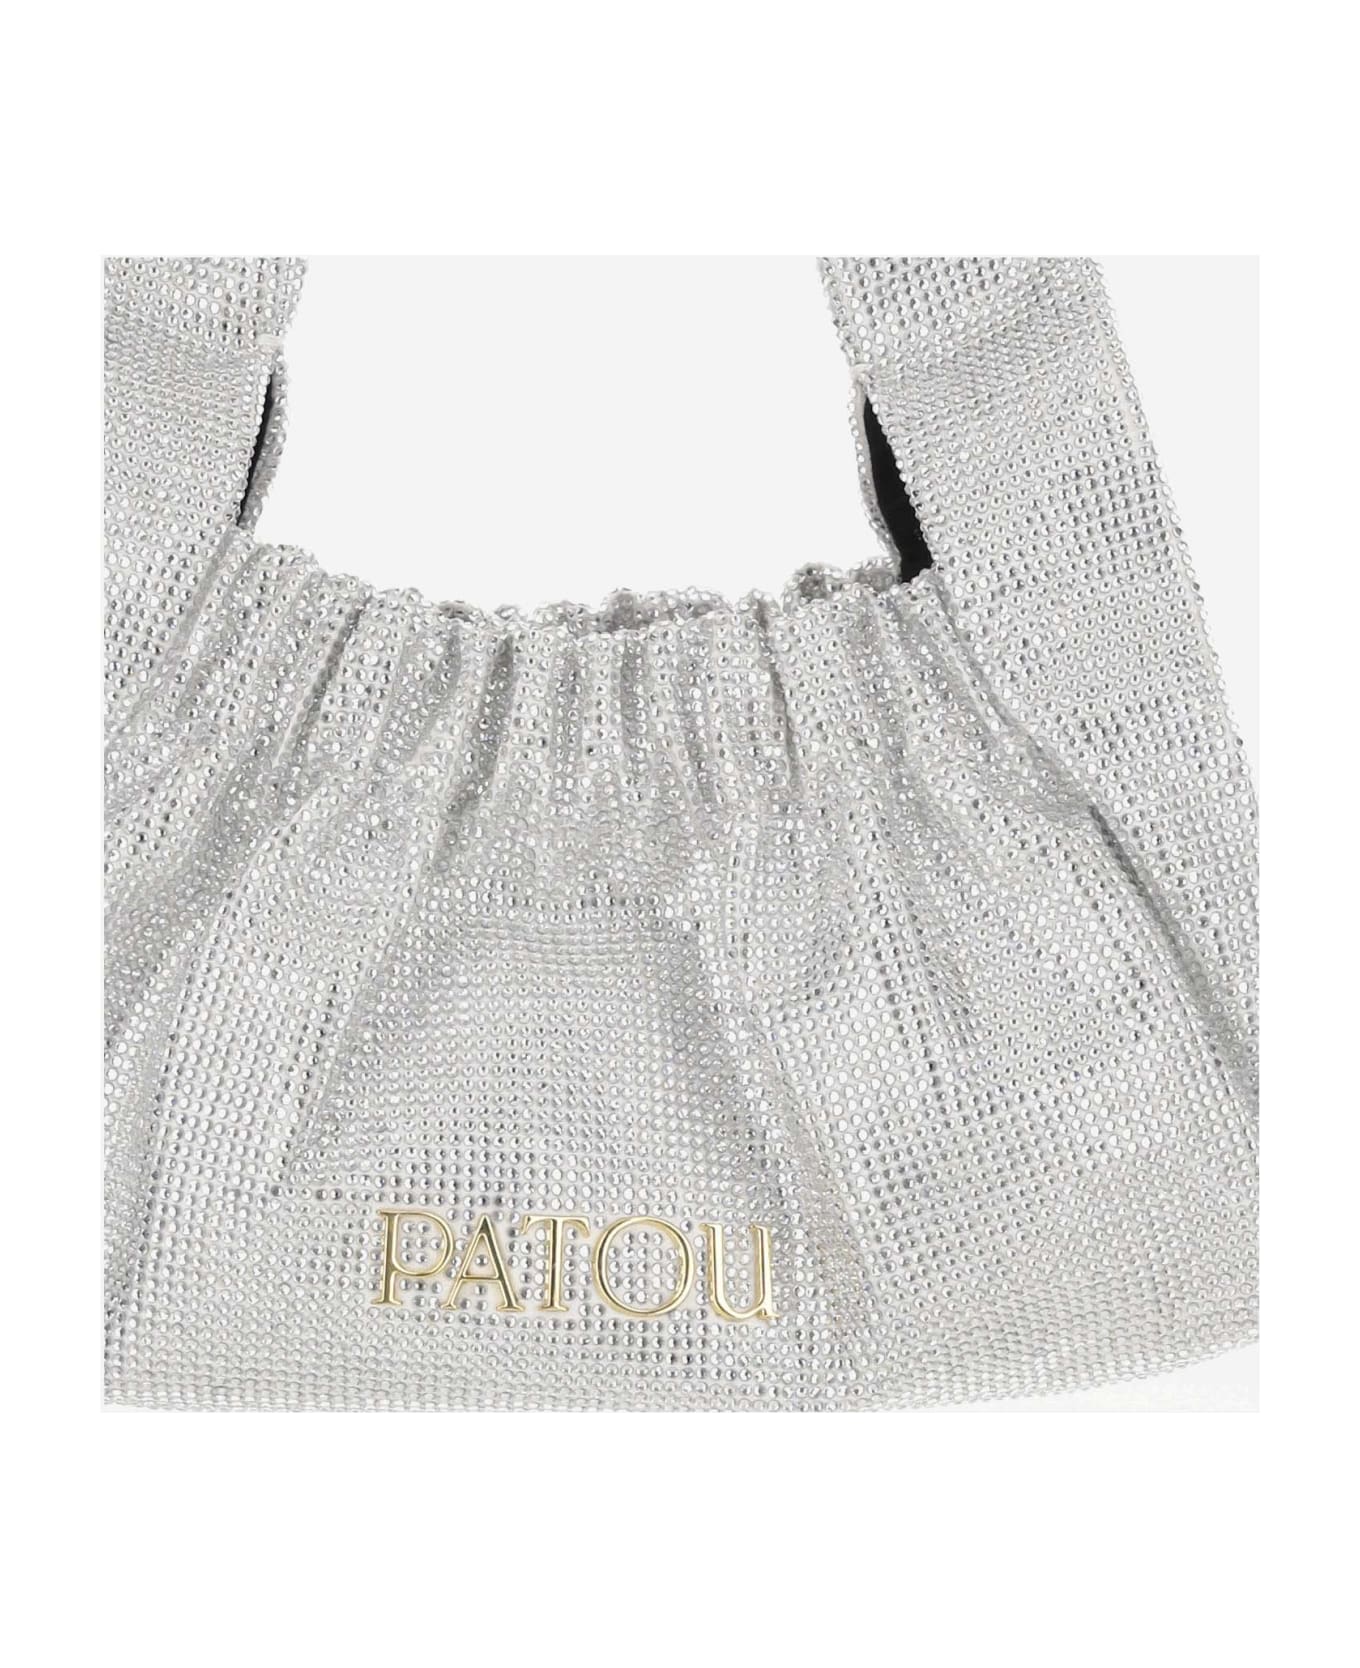 Patou Le Biscuit Satin And Rhinestone Bag - White